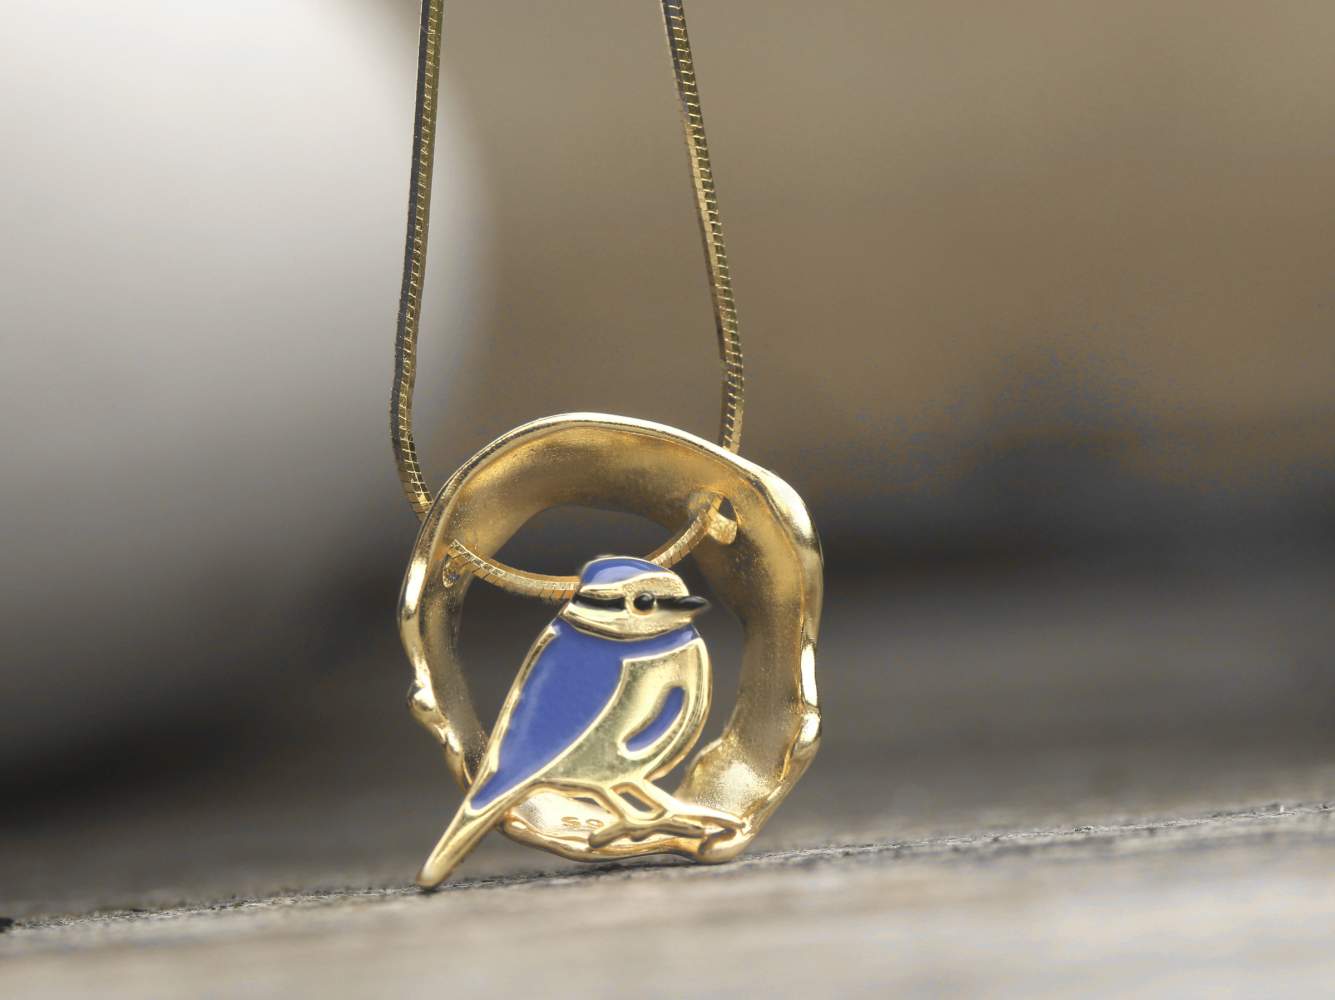 Blue Tit necklace. Vermeil gold sterling silver and enamel